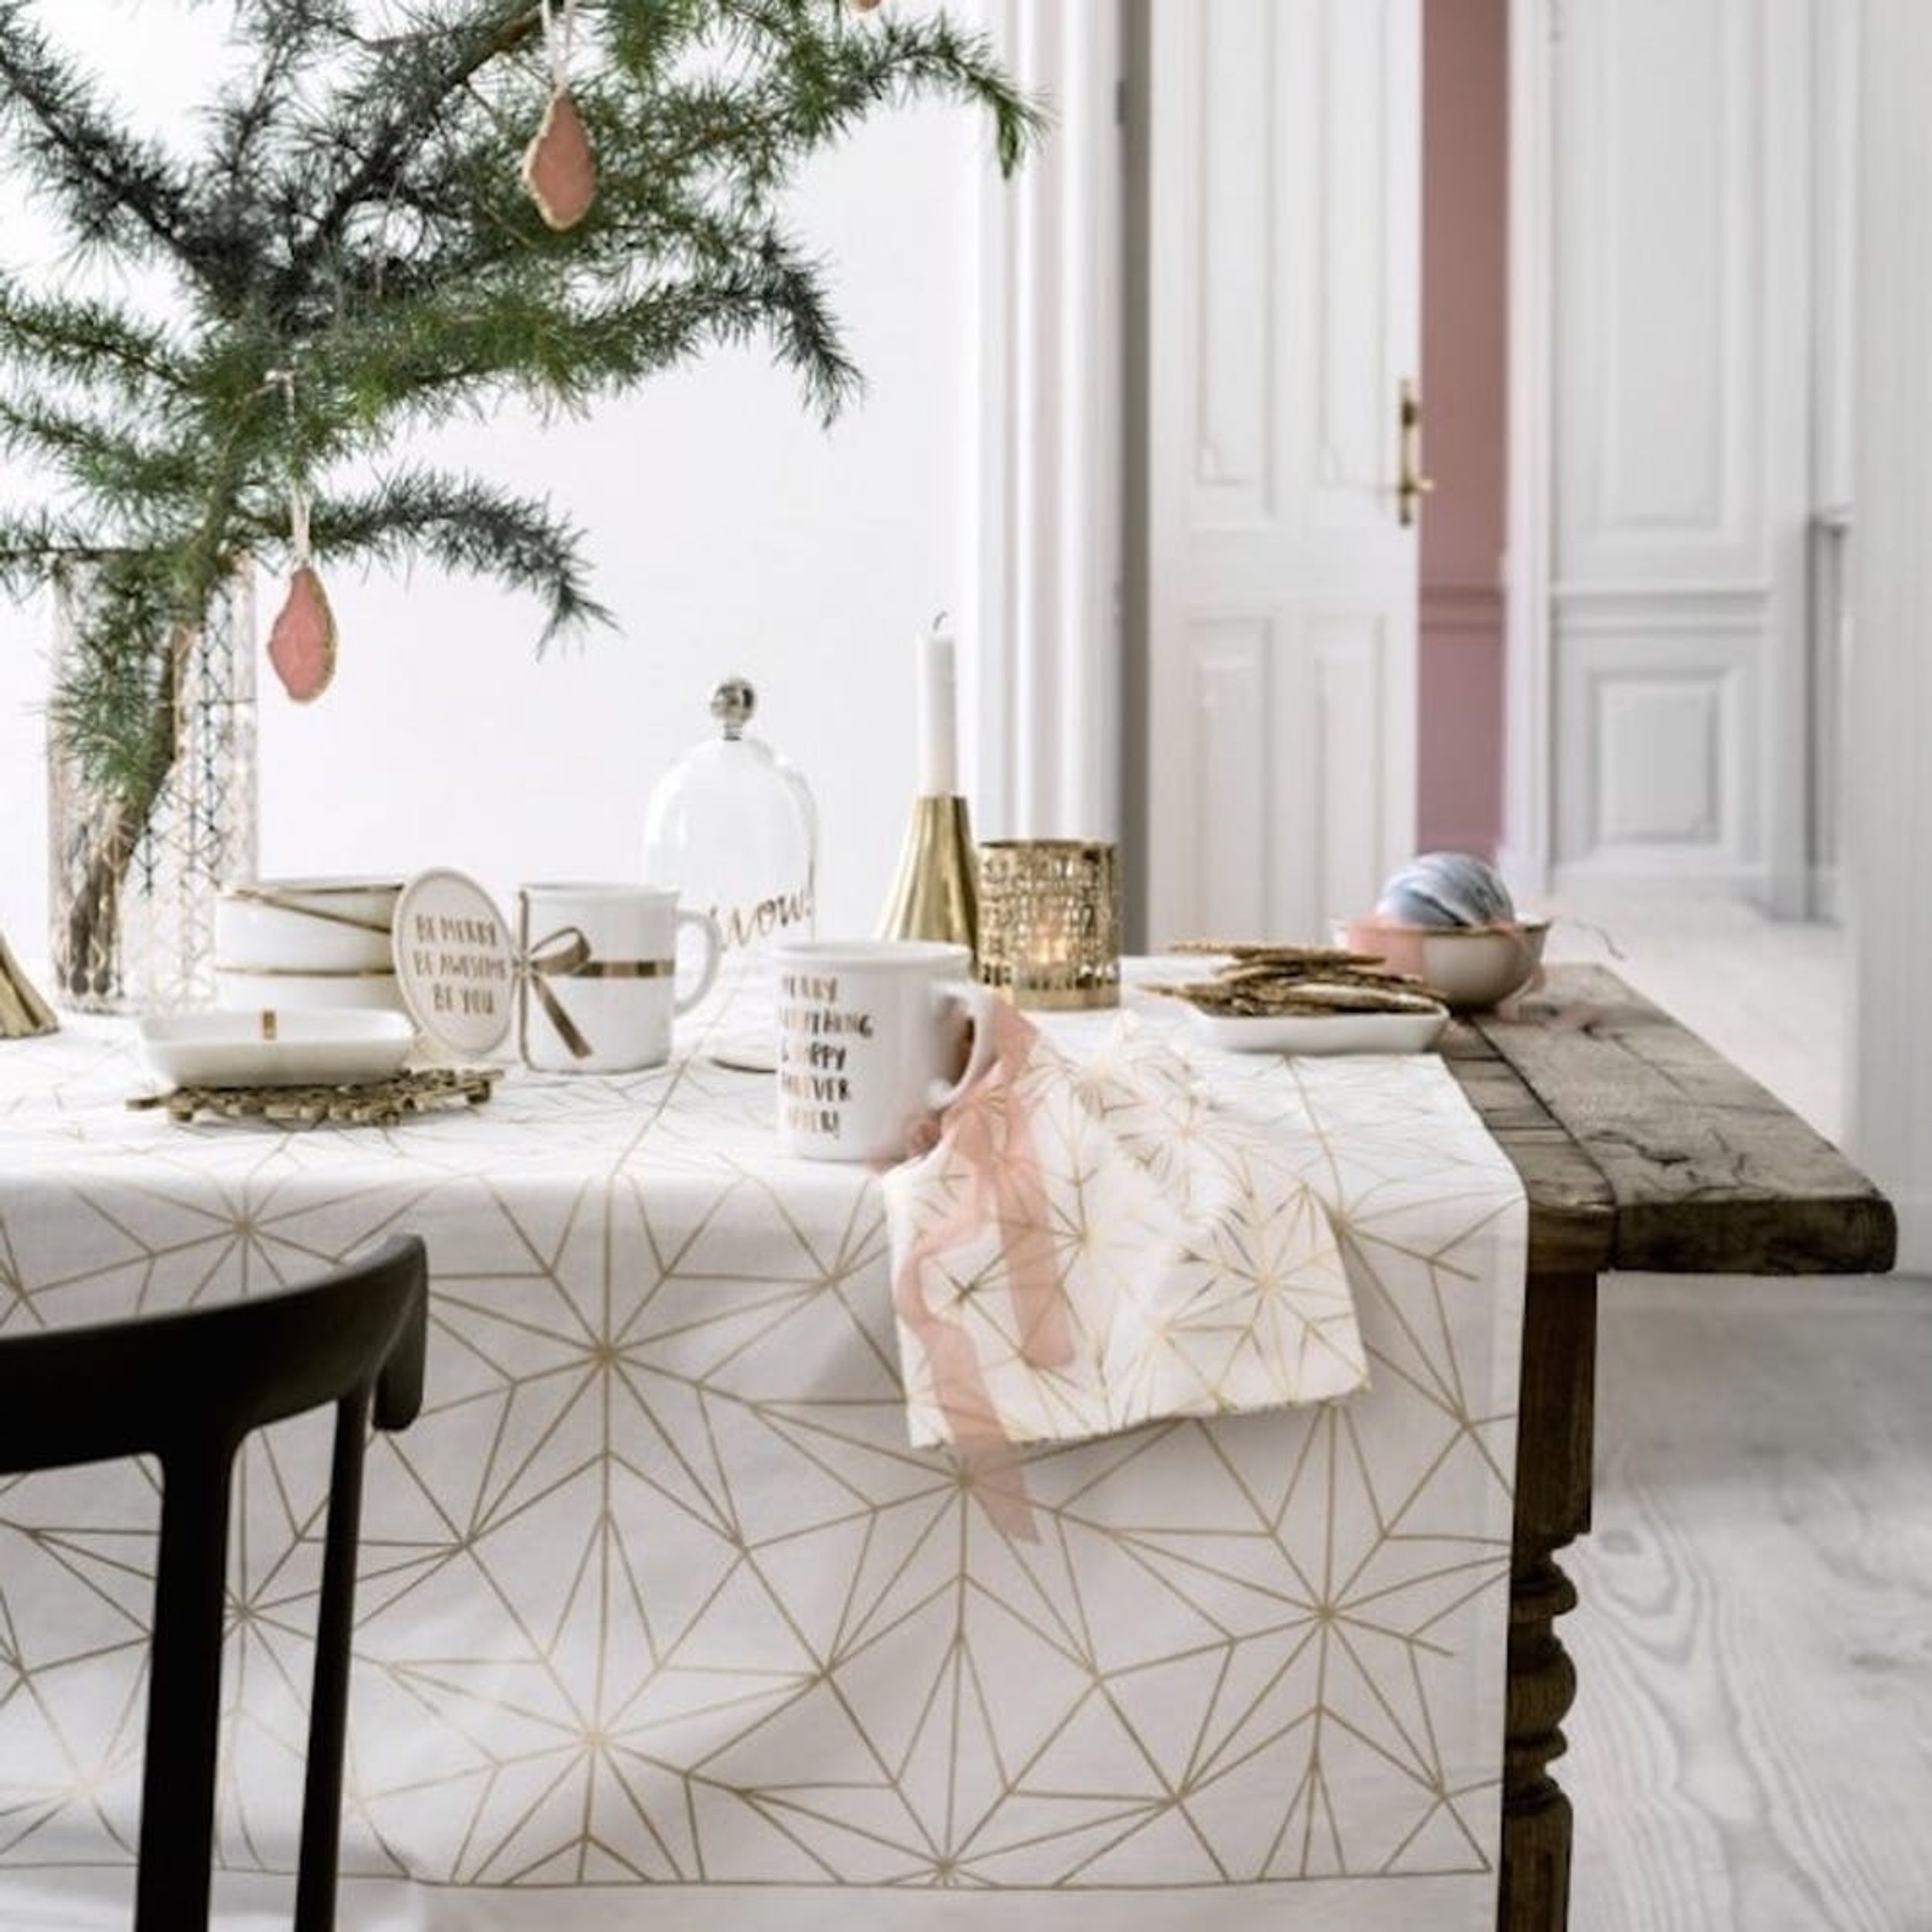 15 Must-Have Holiday Decor Pieces from H&M’s New Line